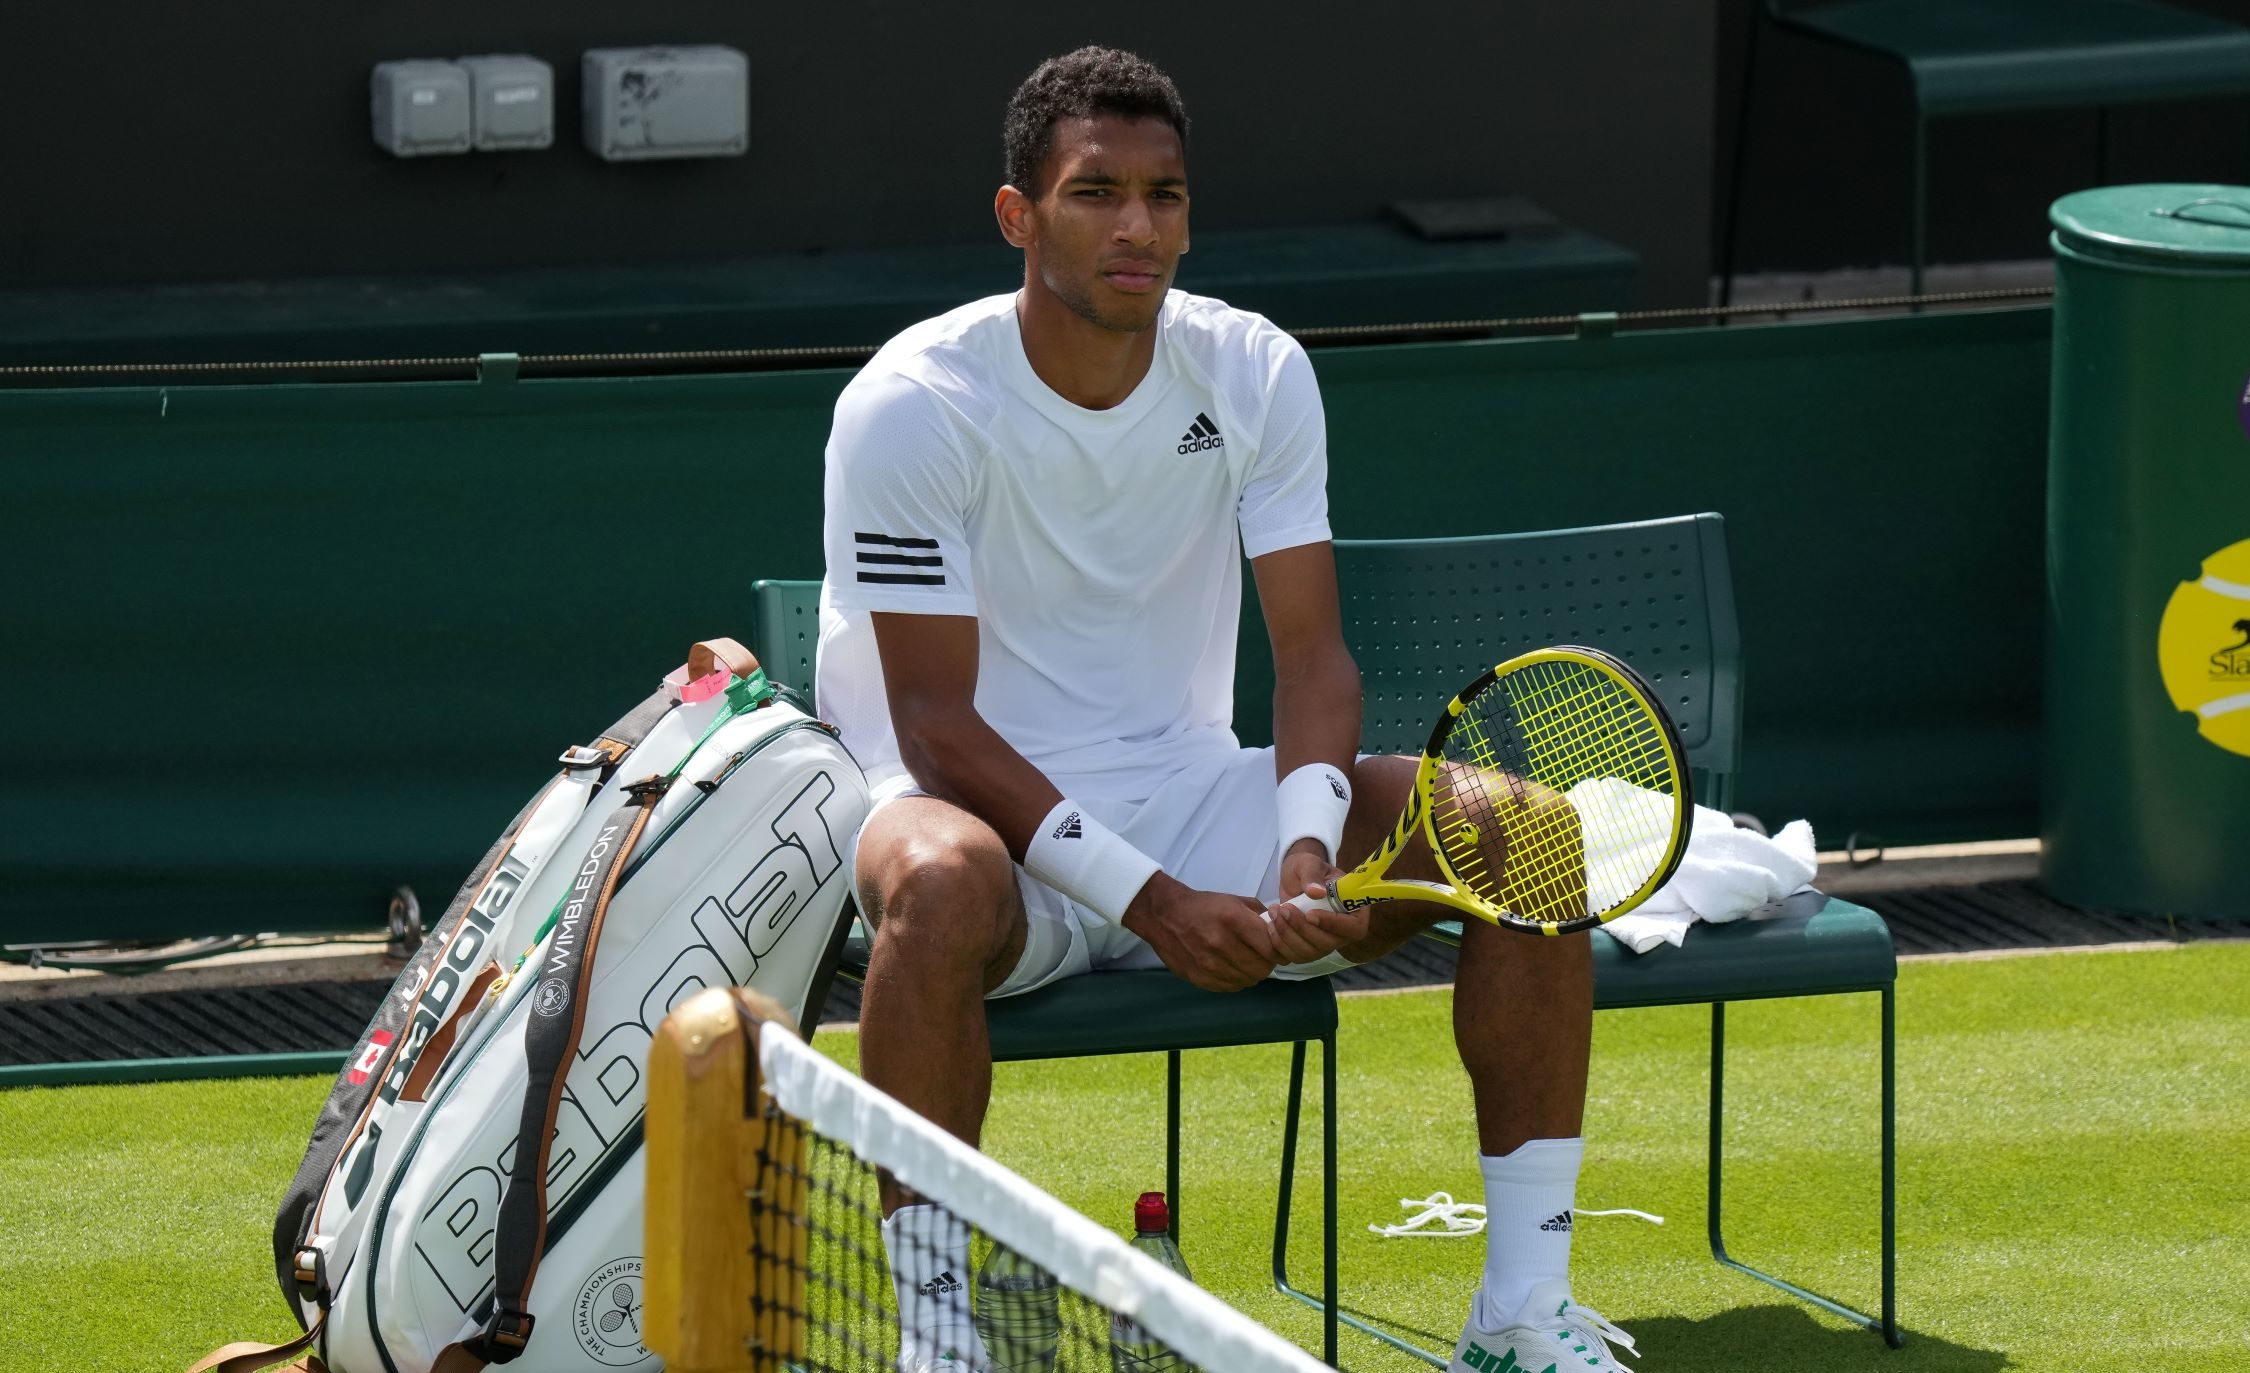 Auger-Aliassime upset in Wimbledon First Round